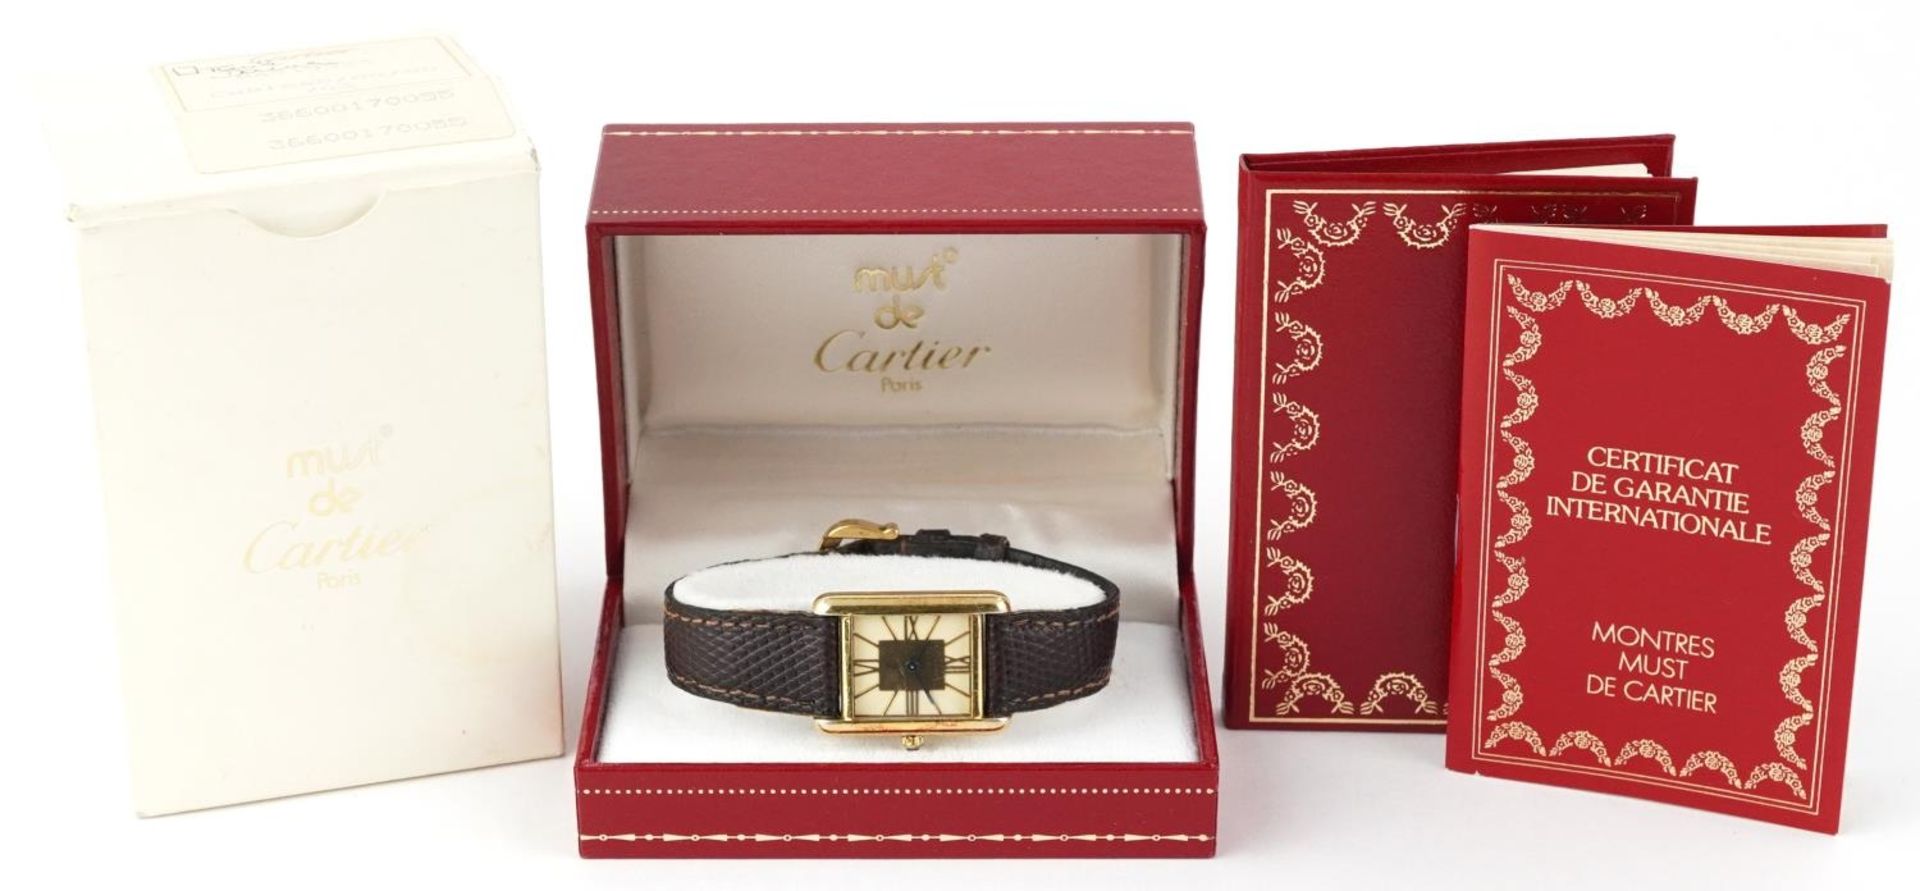 Cartier, ladies Must de Cartier silver gilt wristwatch with box and paperwork, 20mm wide : For